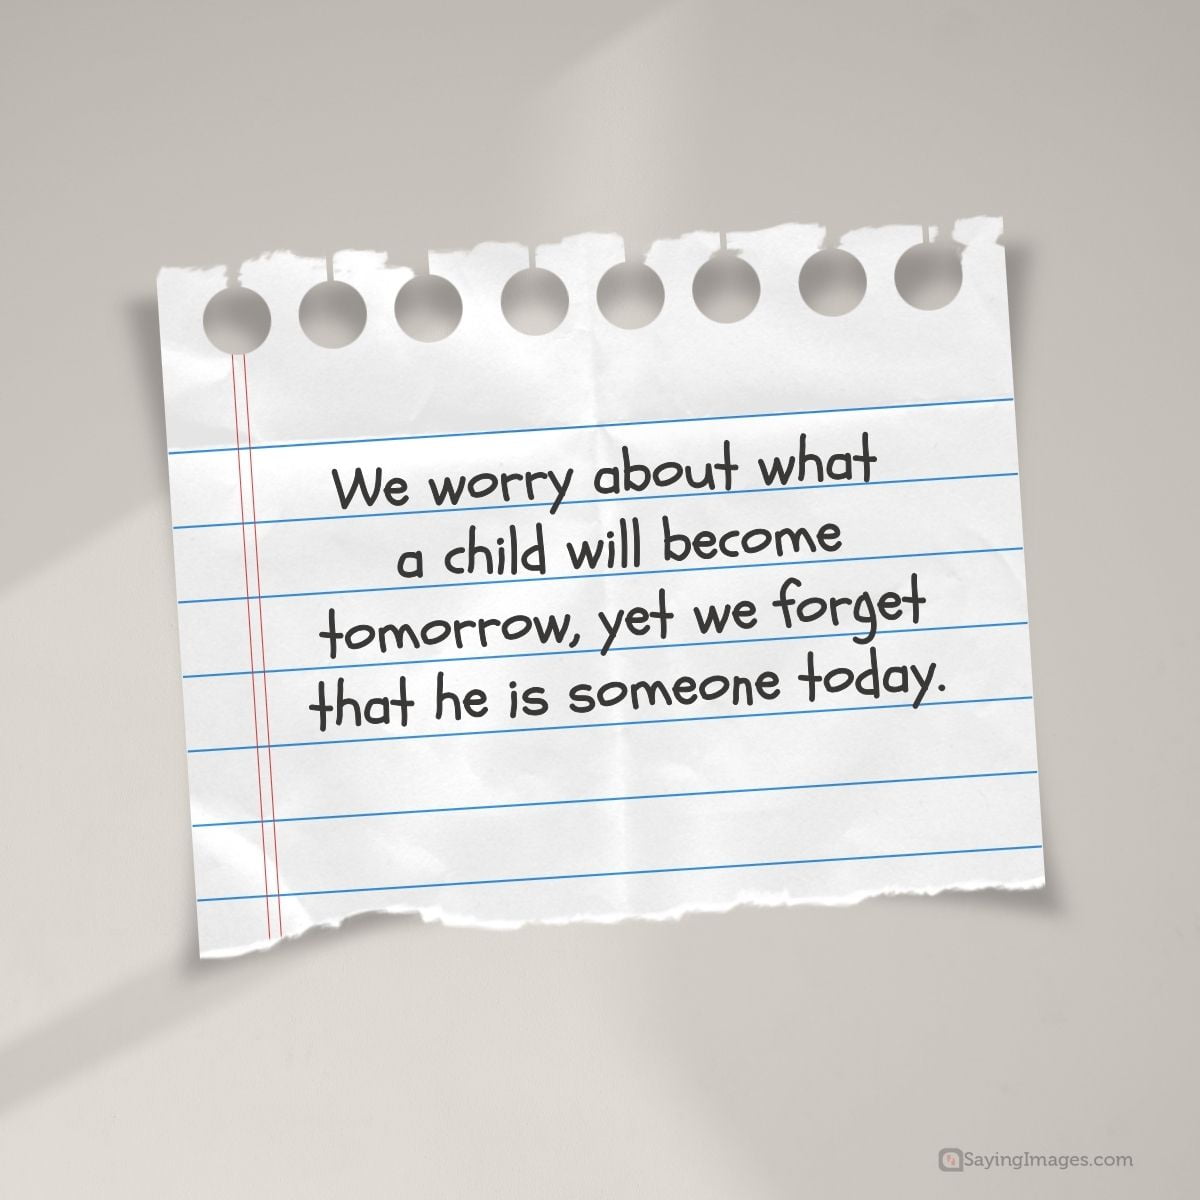 We worry about what a child will become tomorrow